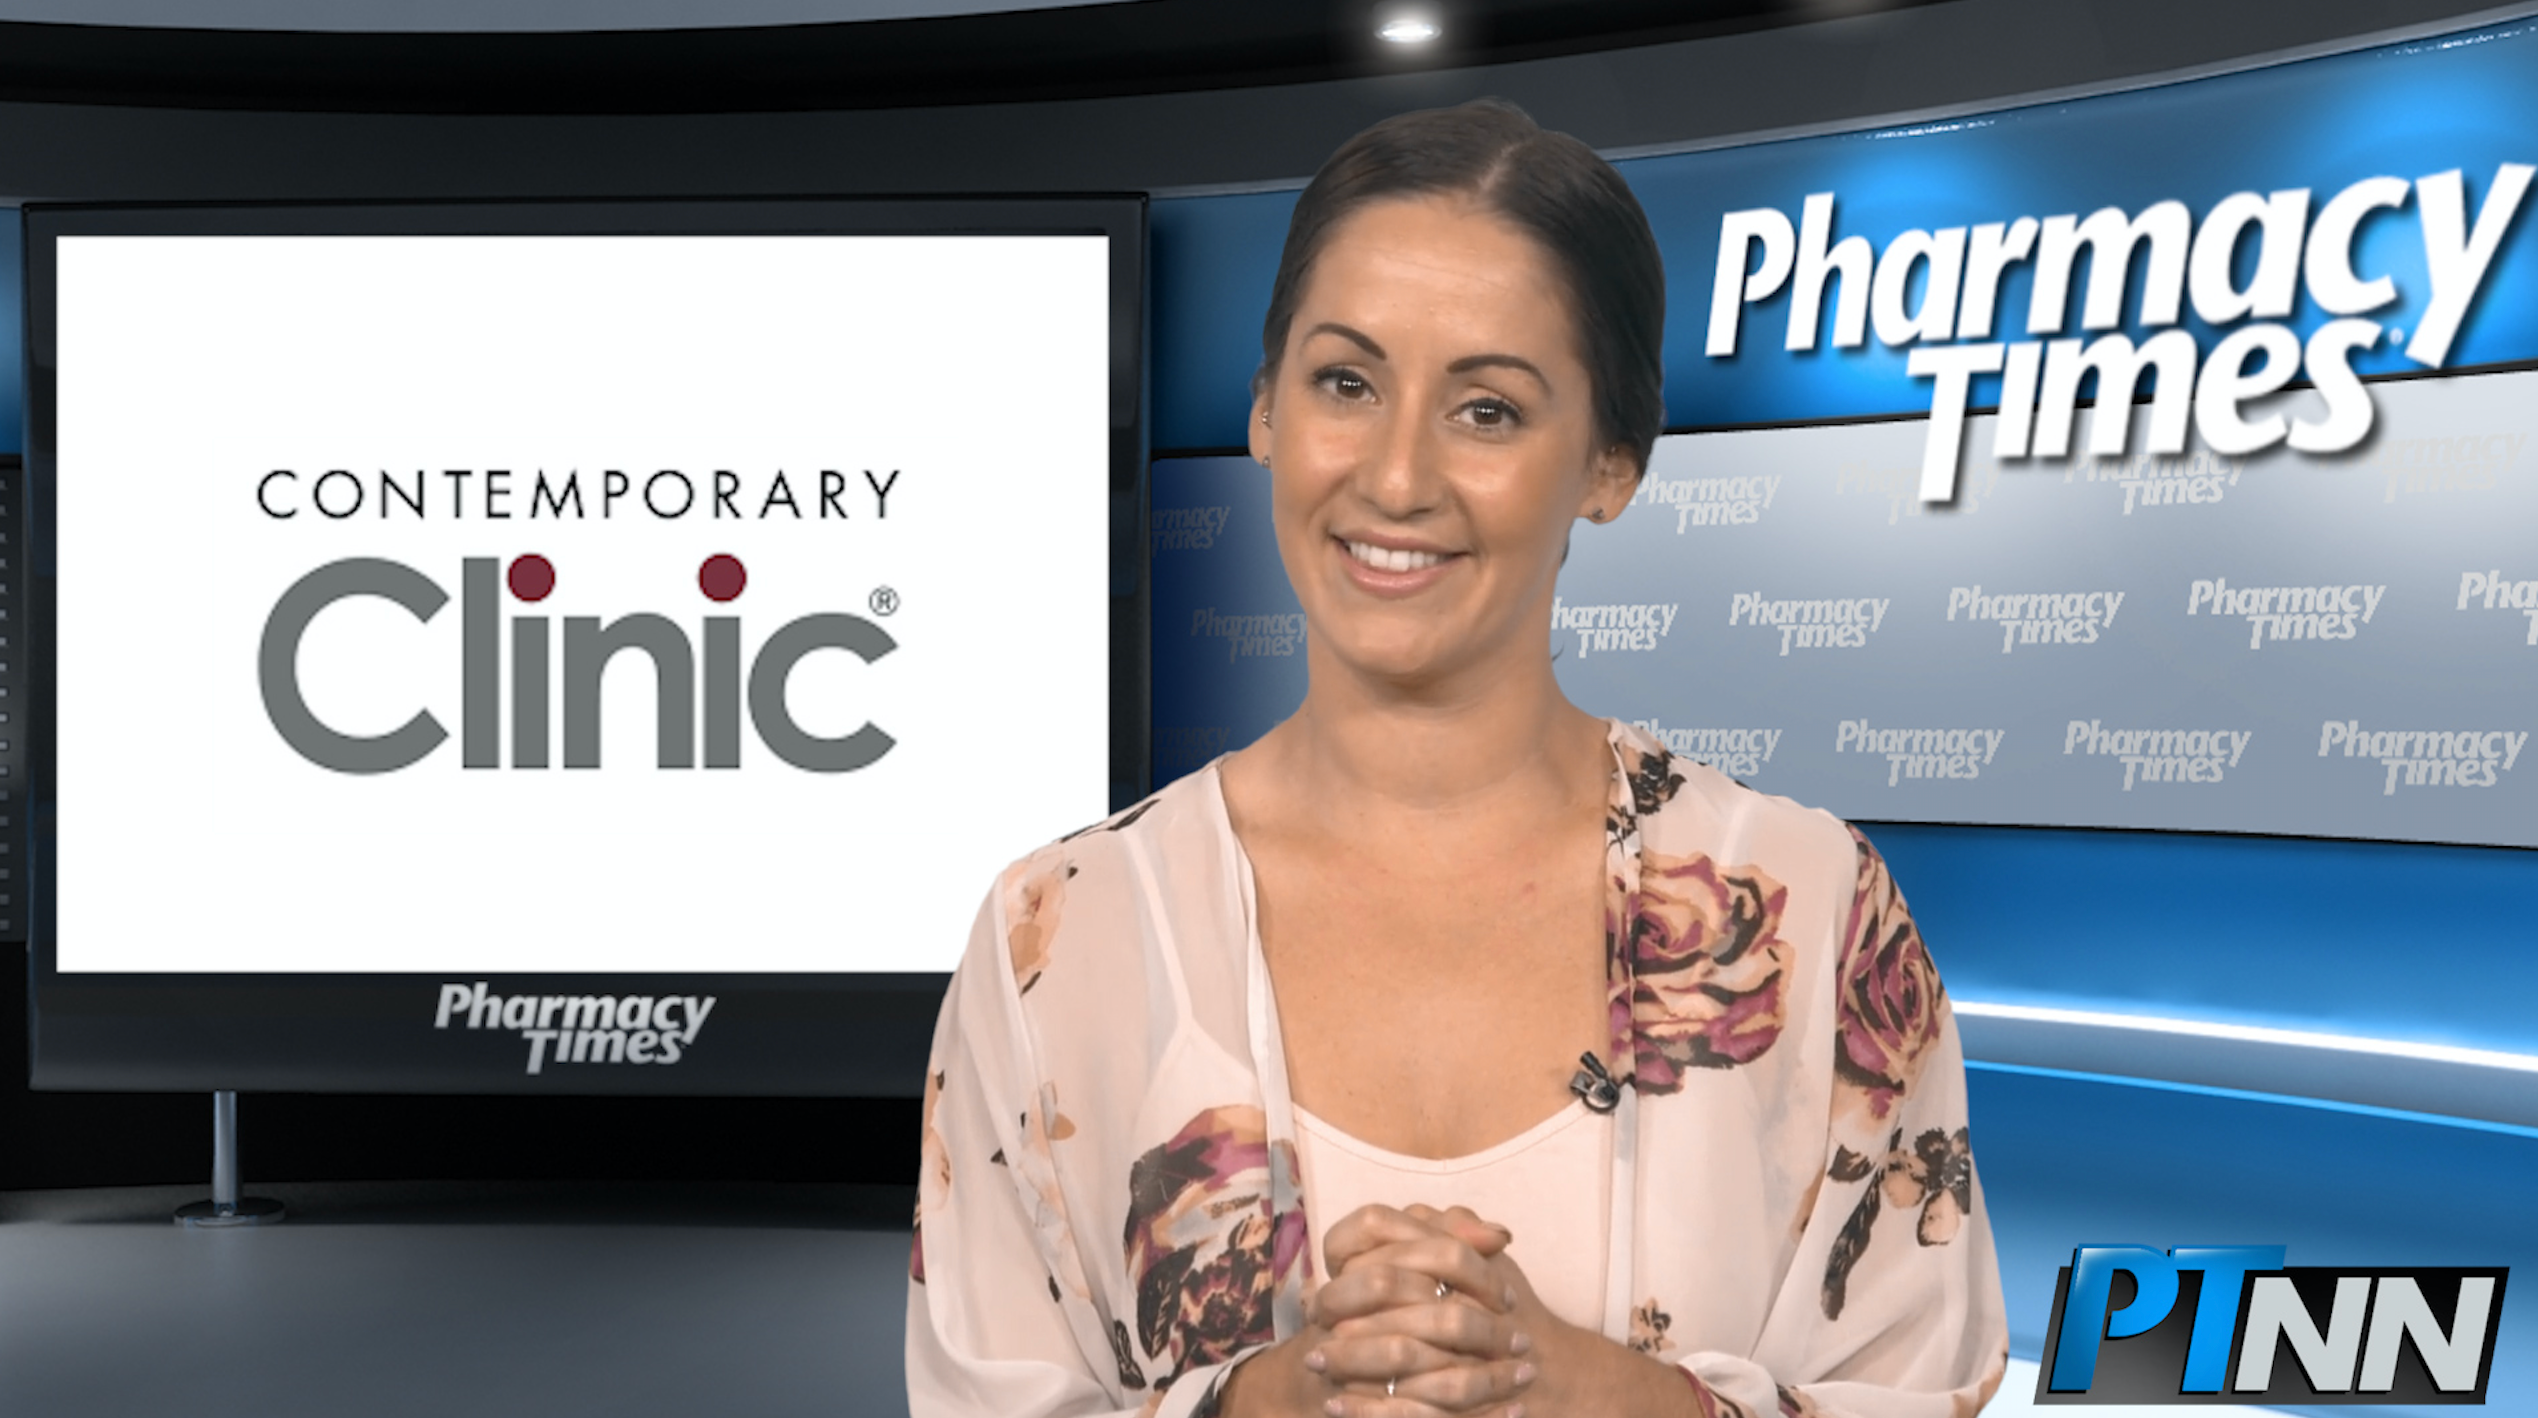 September 27 Pharmacy Week in Review: New Risk for Ovarian Cancer; Drone Deliveries; Updated ALS Treatment Guidelines